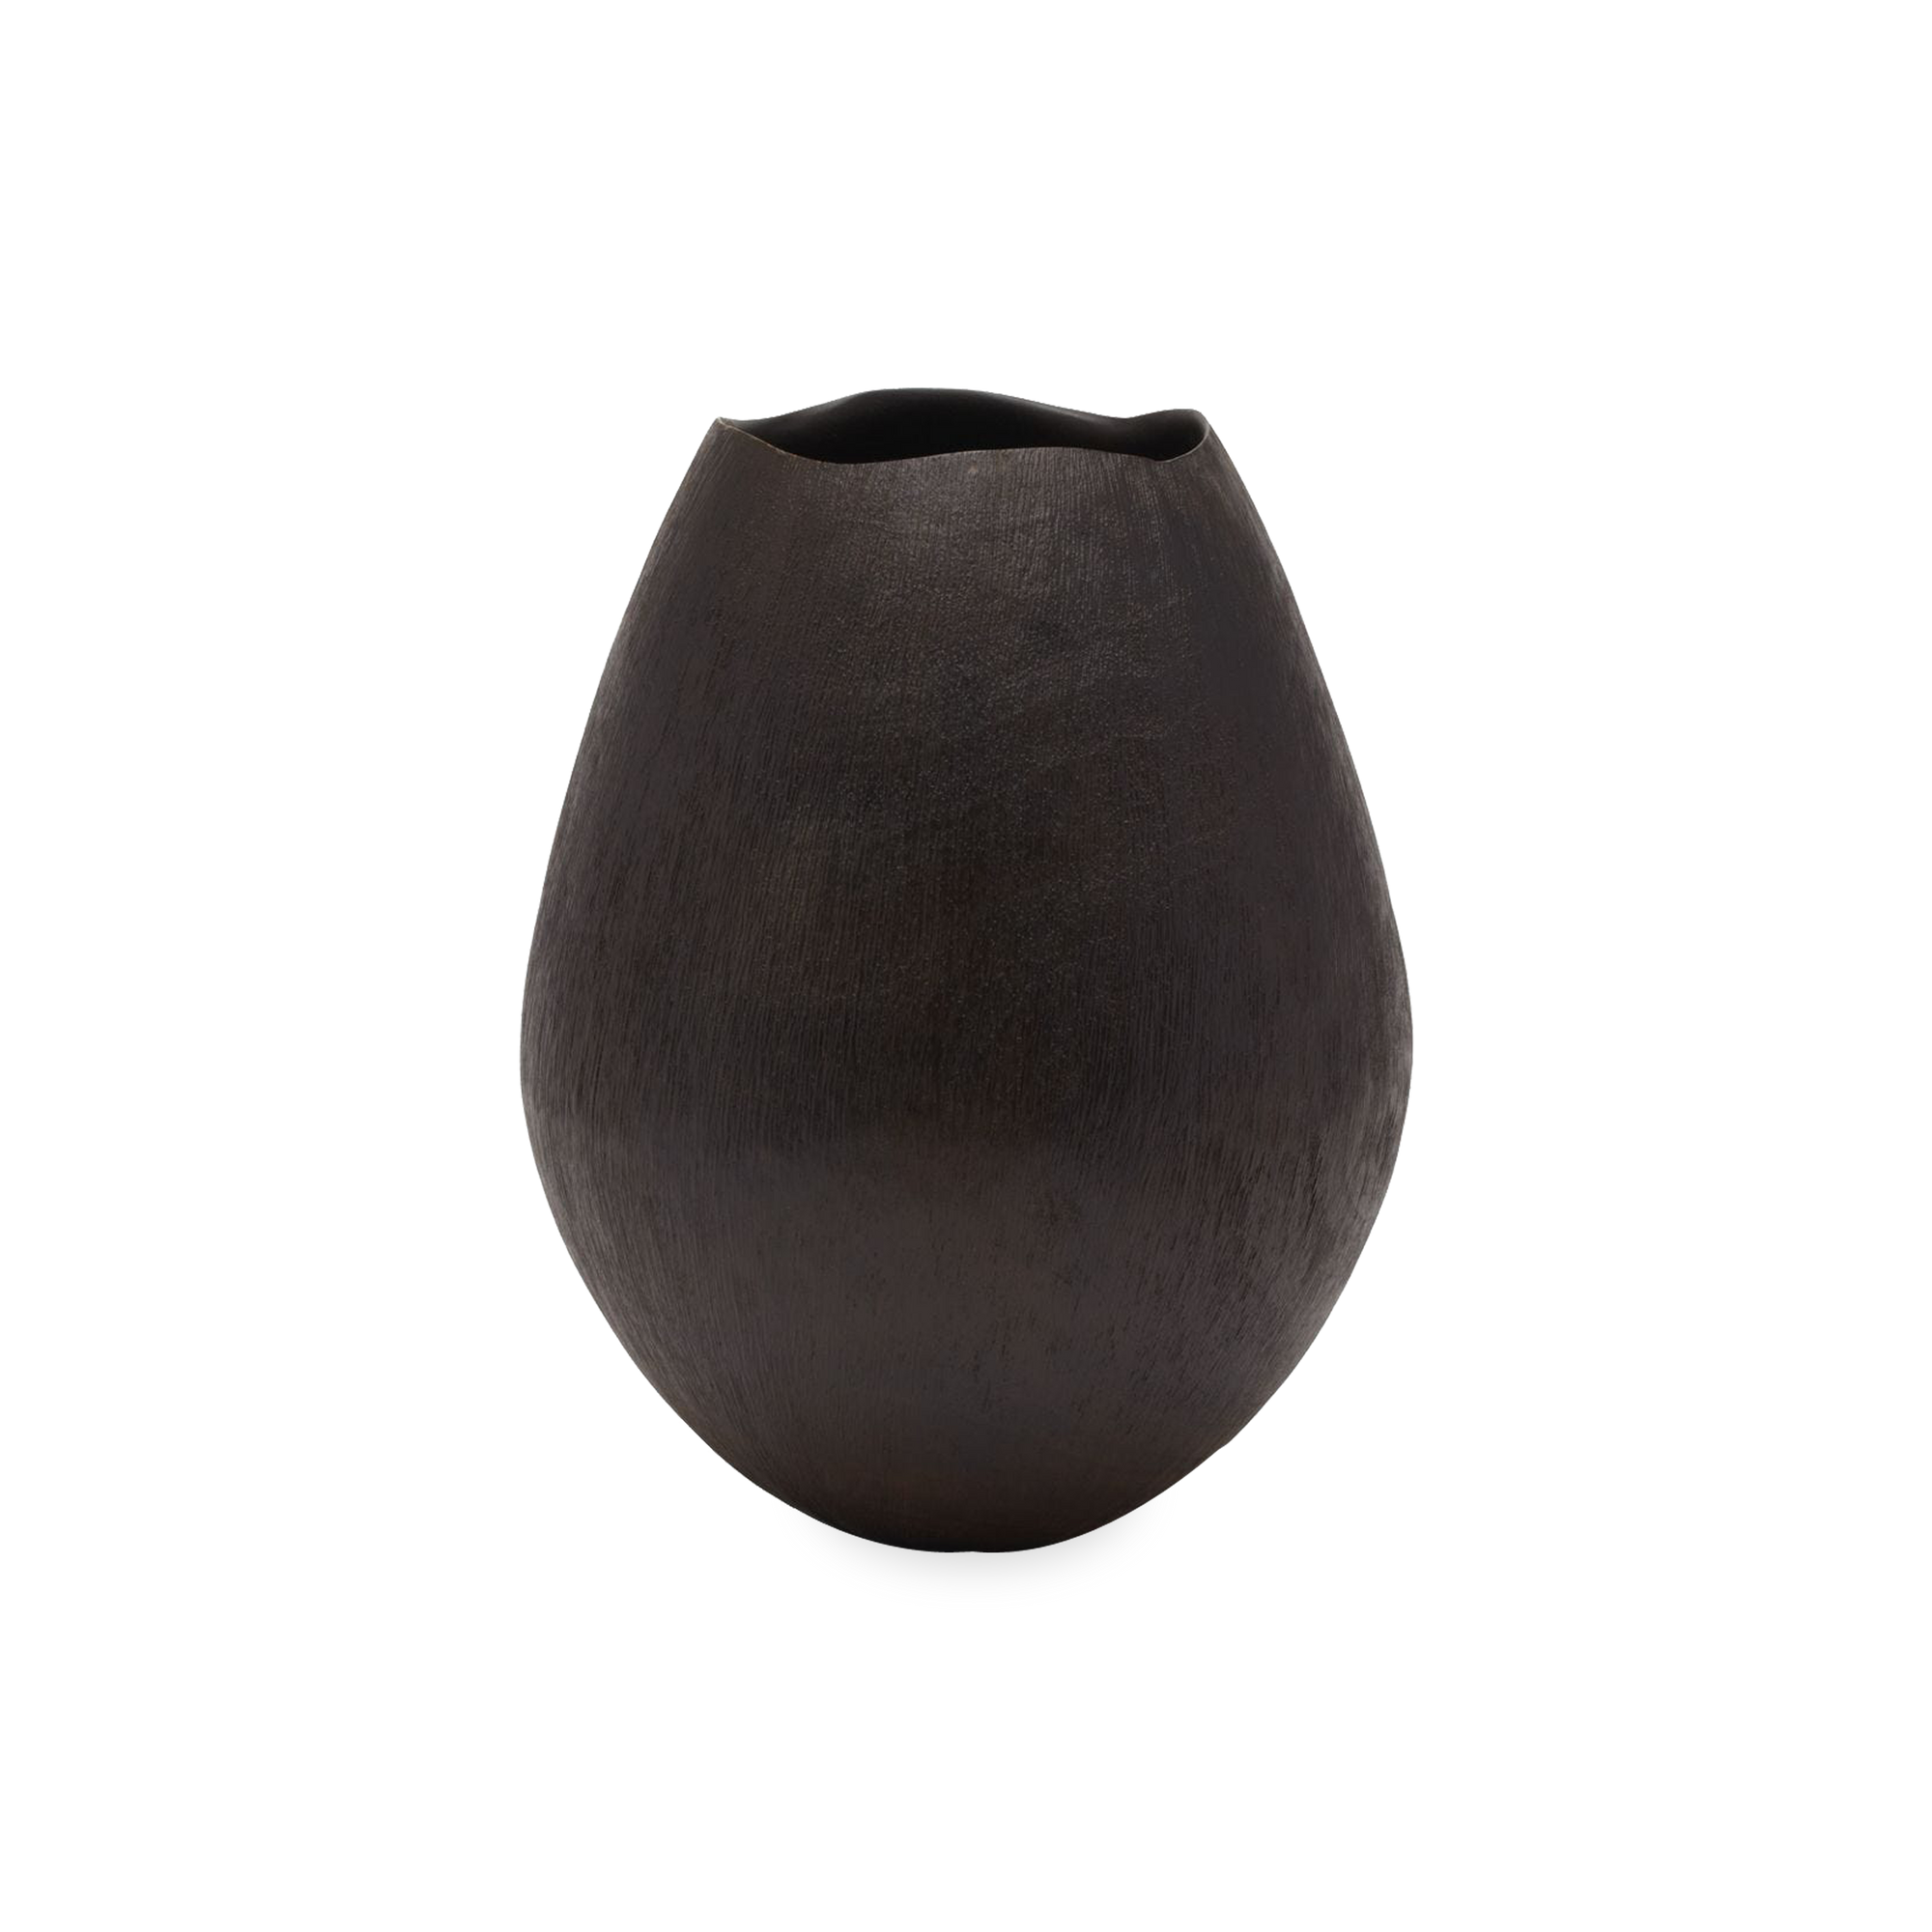 Adding an element of natural textures and organic forms, this Mango Wood Vase features a subtle egg-shaped design with an irregular curving edge.